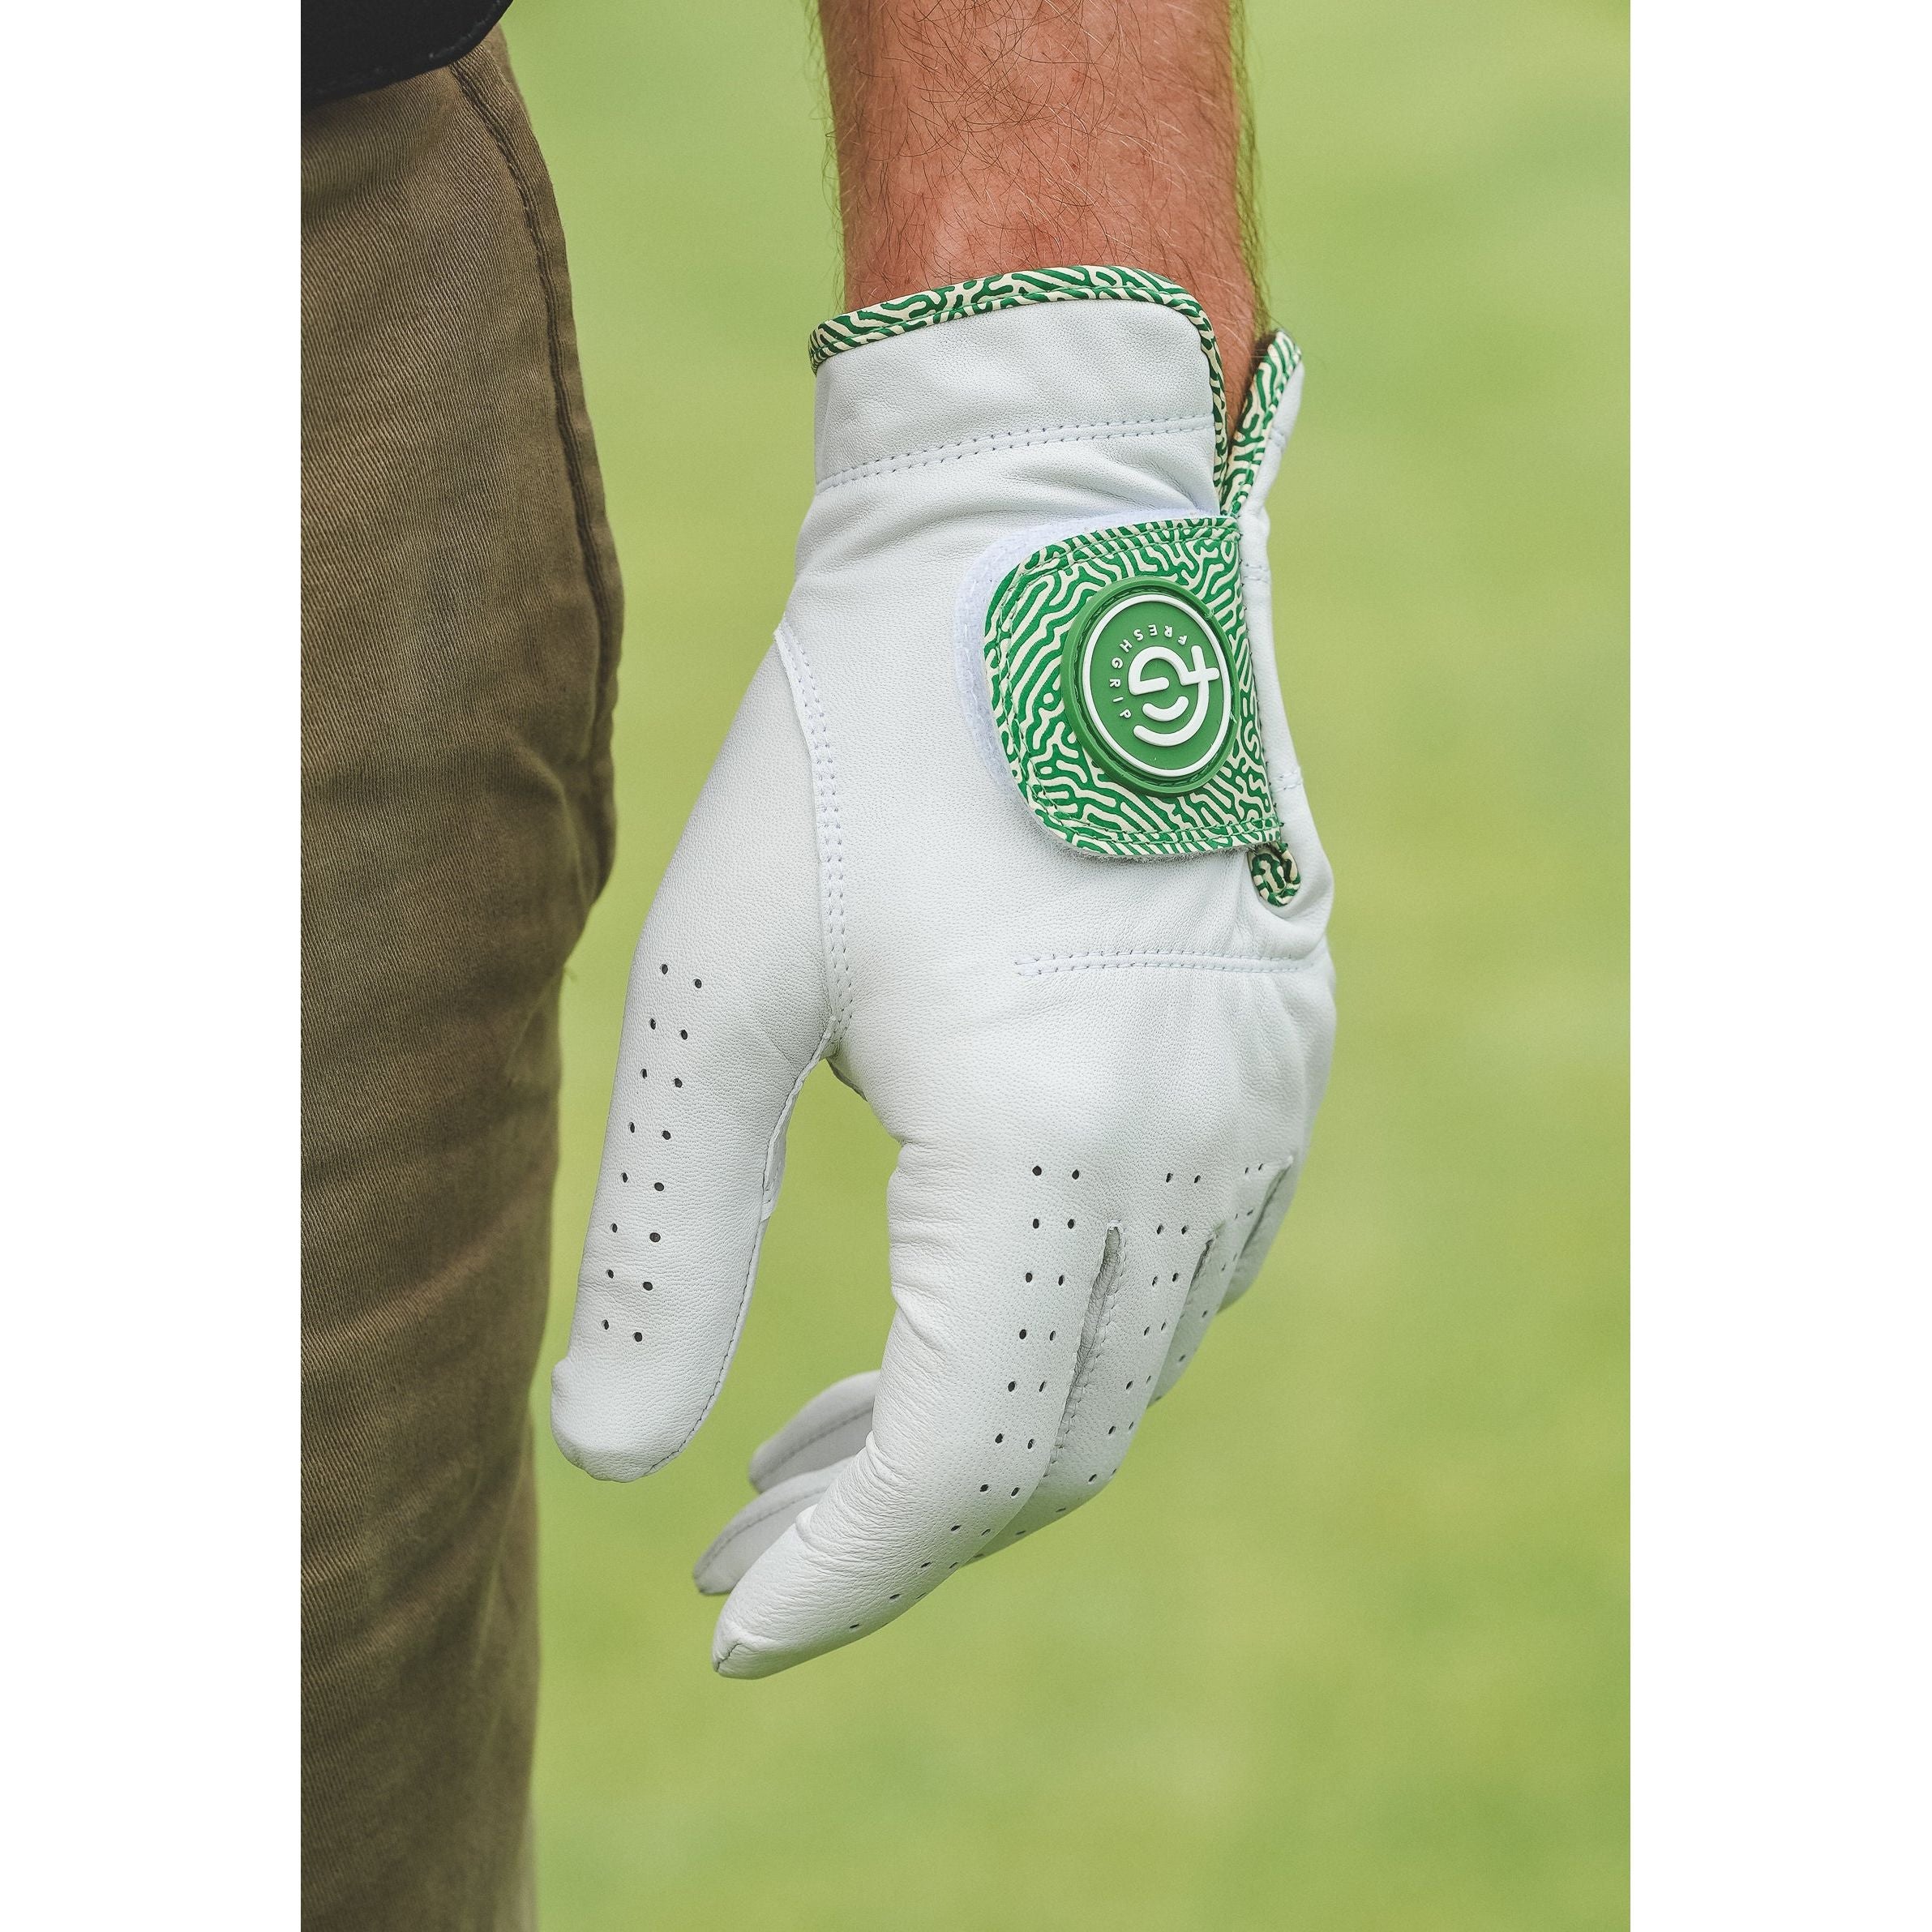 Contours Golf Glove | Players Edition